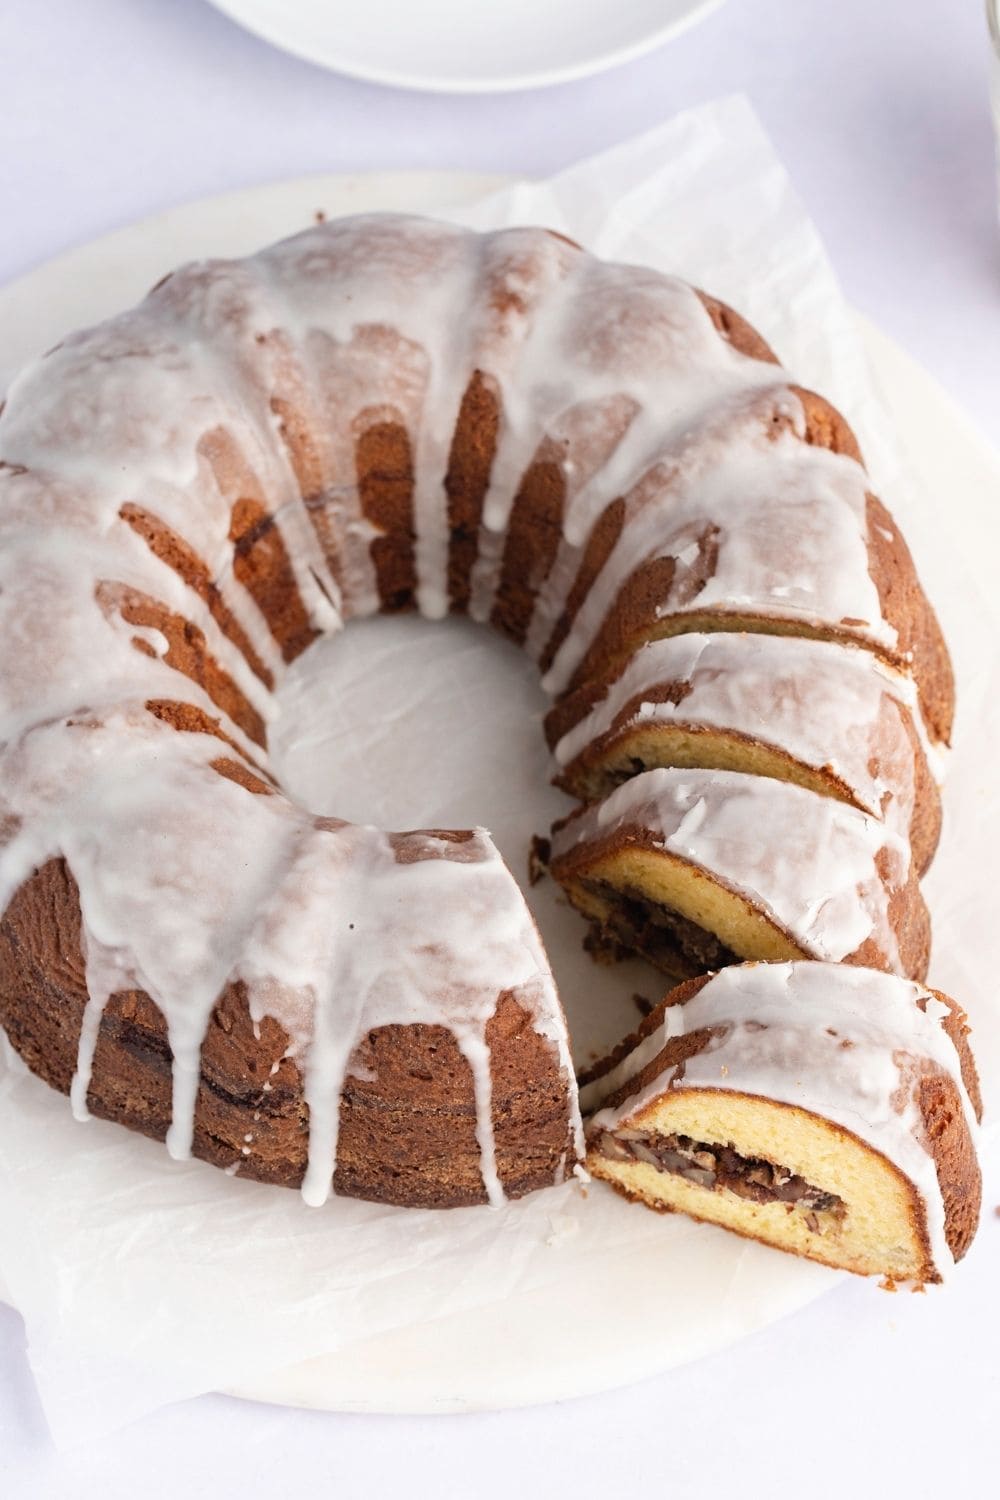 Homemade Sock It To Me Bundt Cake with Pecans and Vanilla Glaze